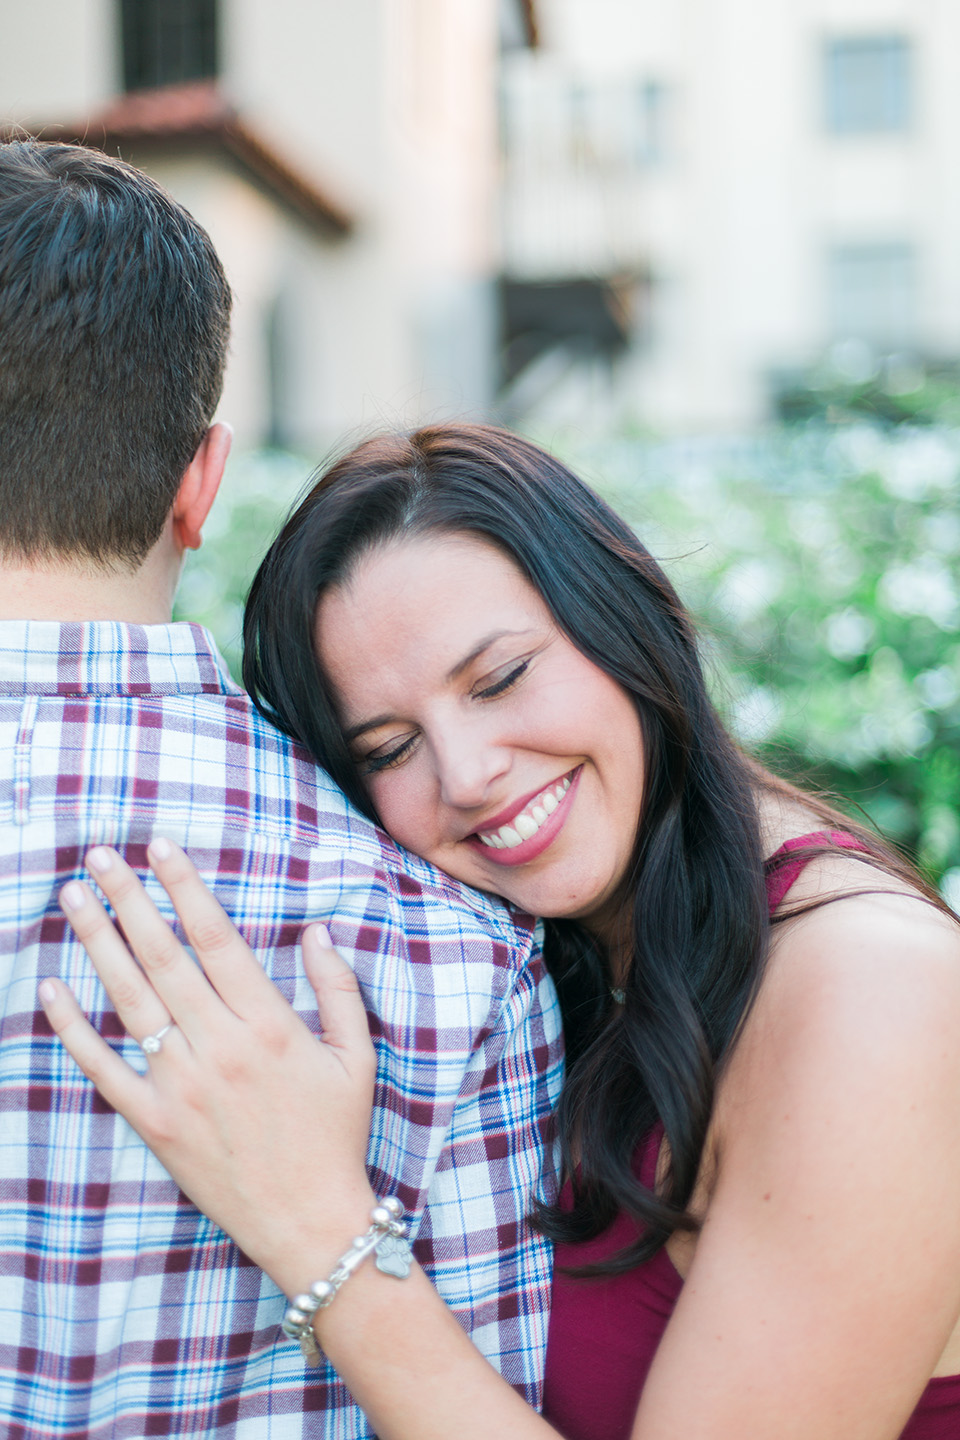 Image of an engaged couple in downtown Orlando, Florida.  The woman is closing her eyes and resting her head on her fiance's shoulder.  You can see her engagement ring on her left ring finger.